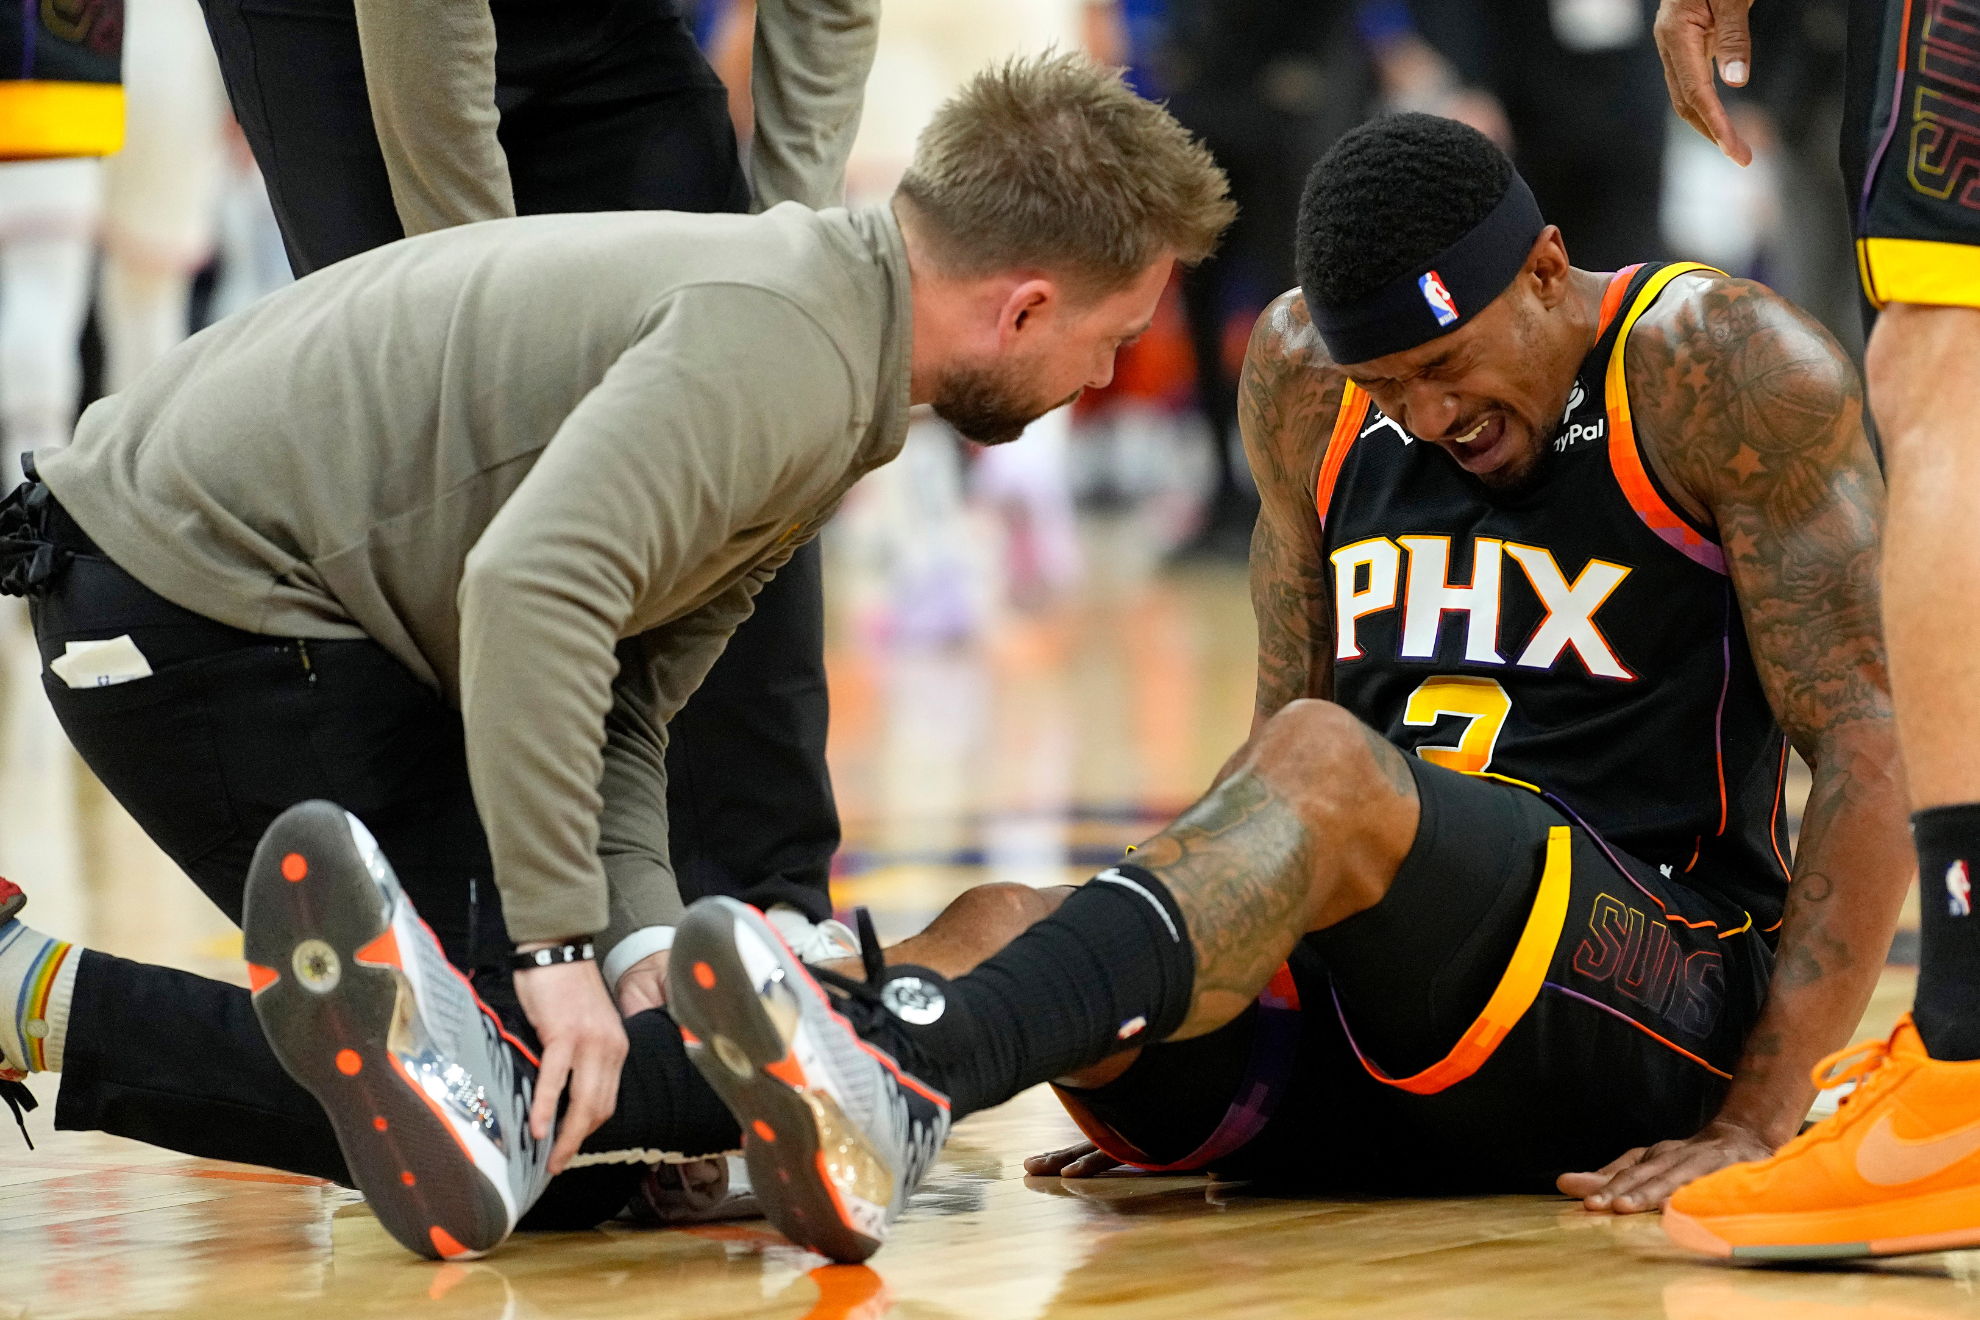 Beal (right) grimaces in pain after rolling his ankle on Friday night.